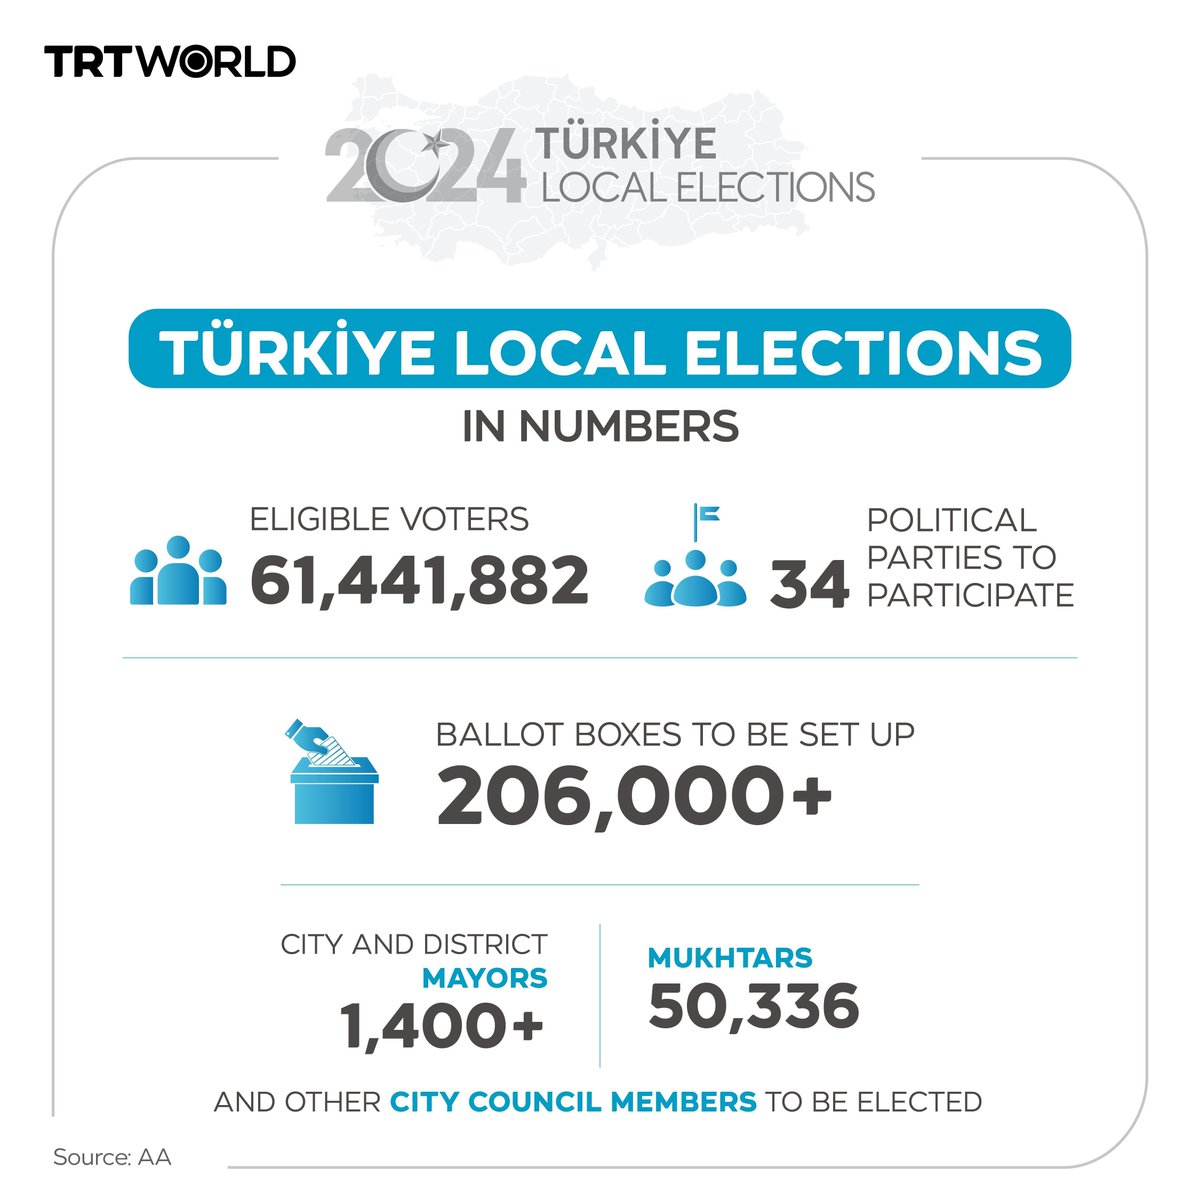 With over 61 million voters heading to the polls for Türkiye's local elections, here is a closer look at the elections in numbers